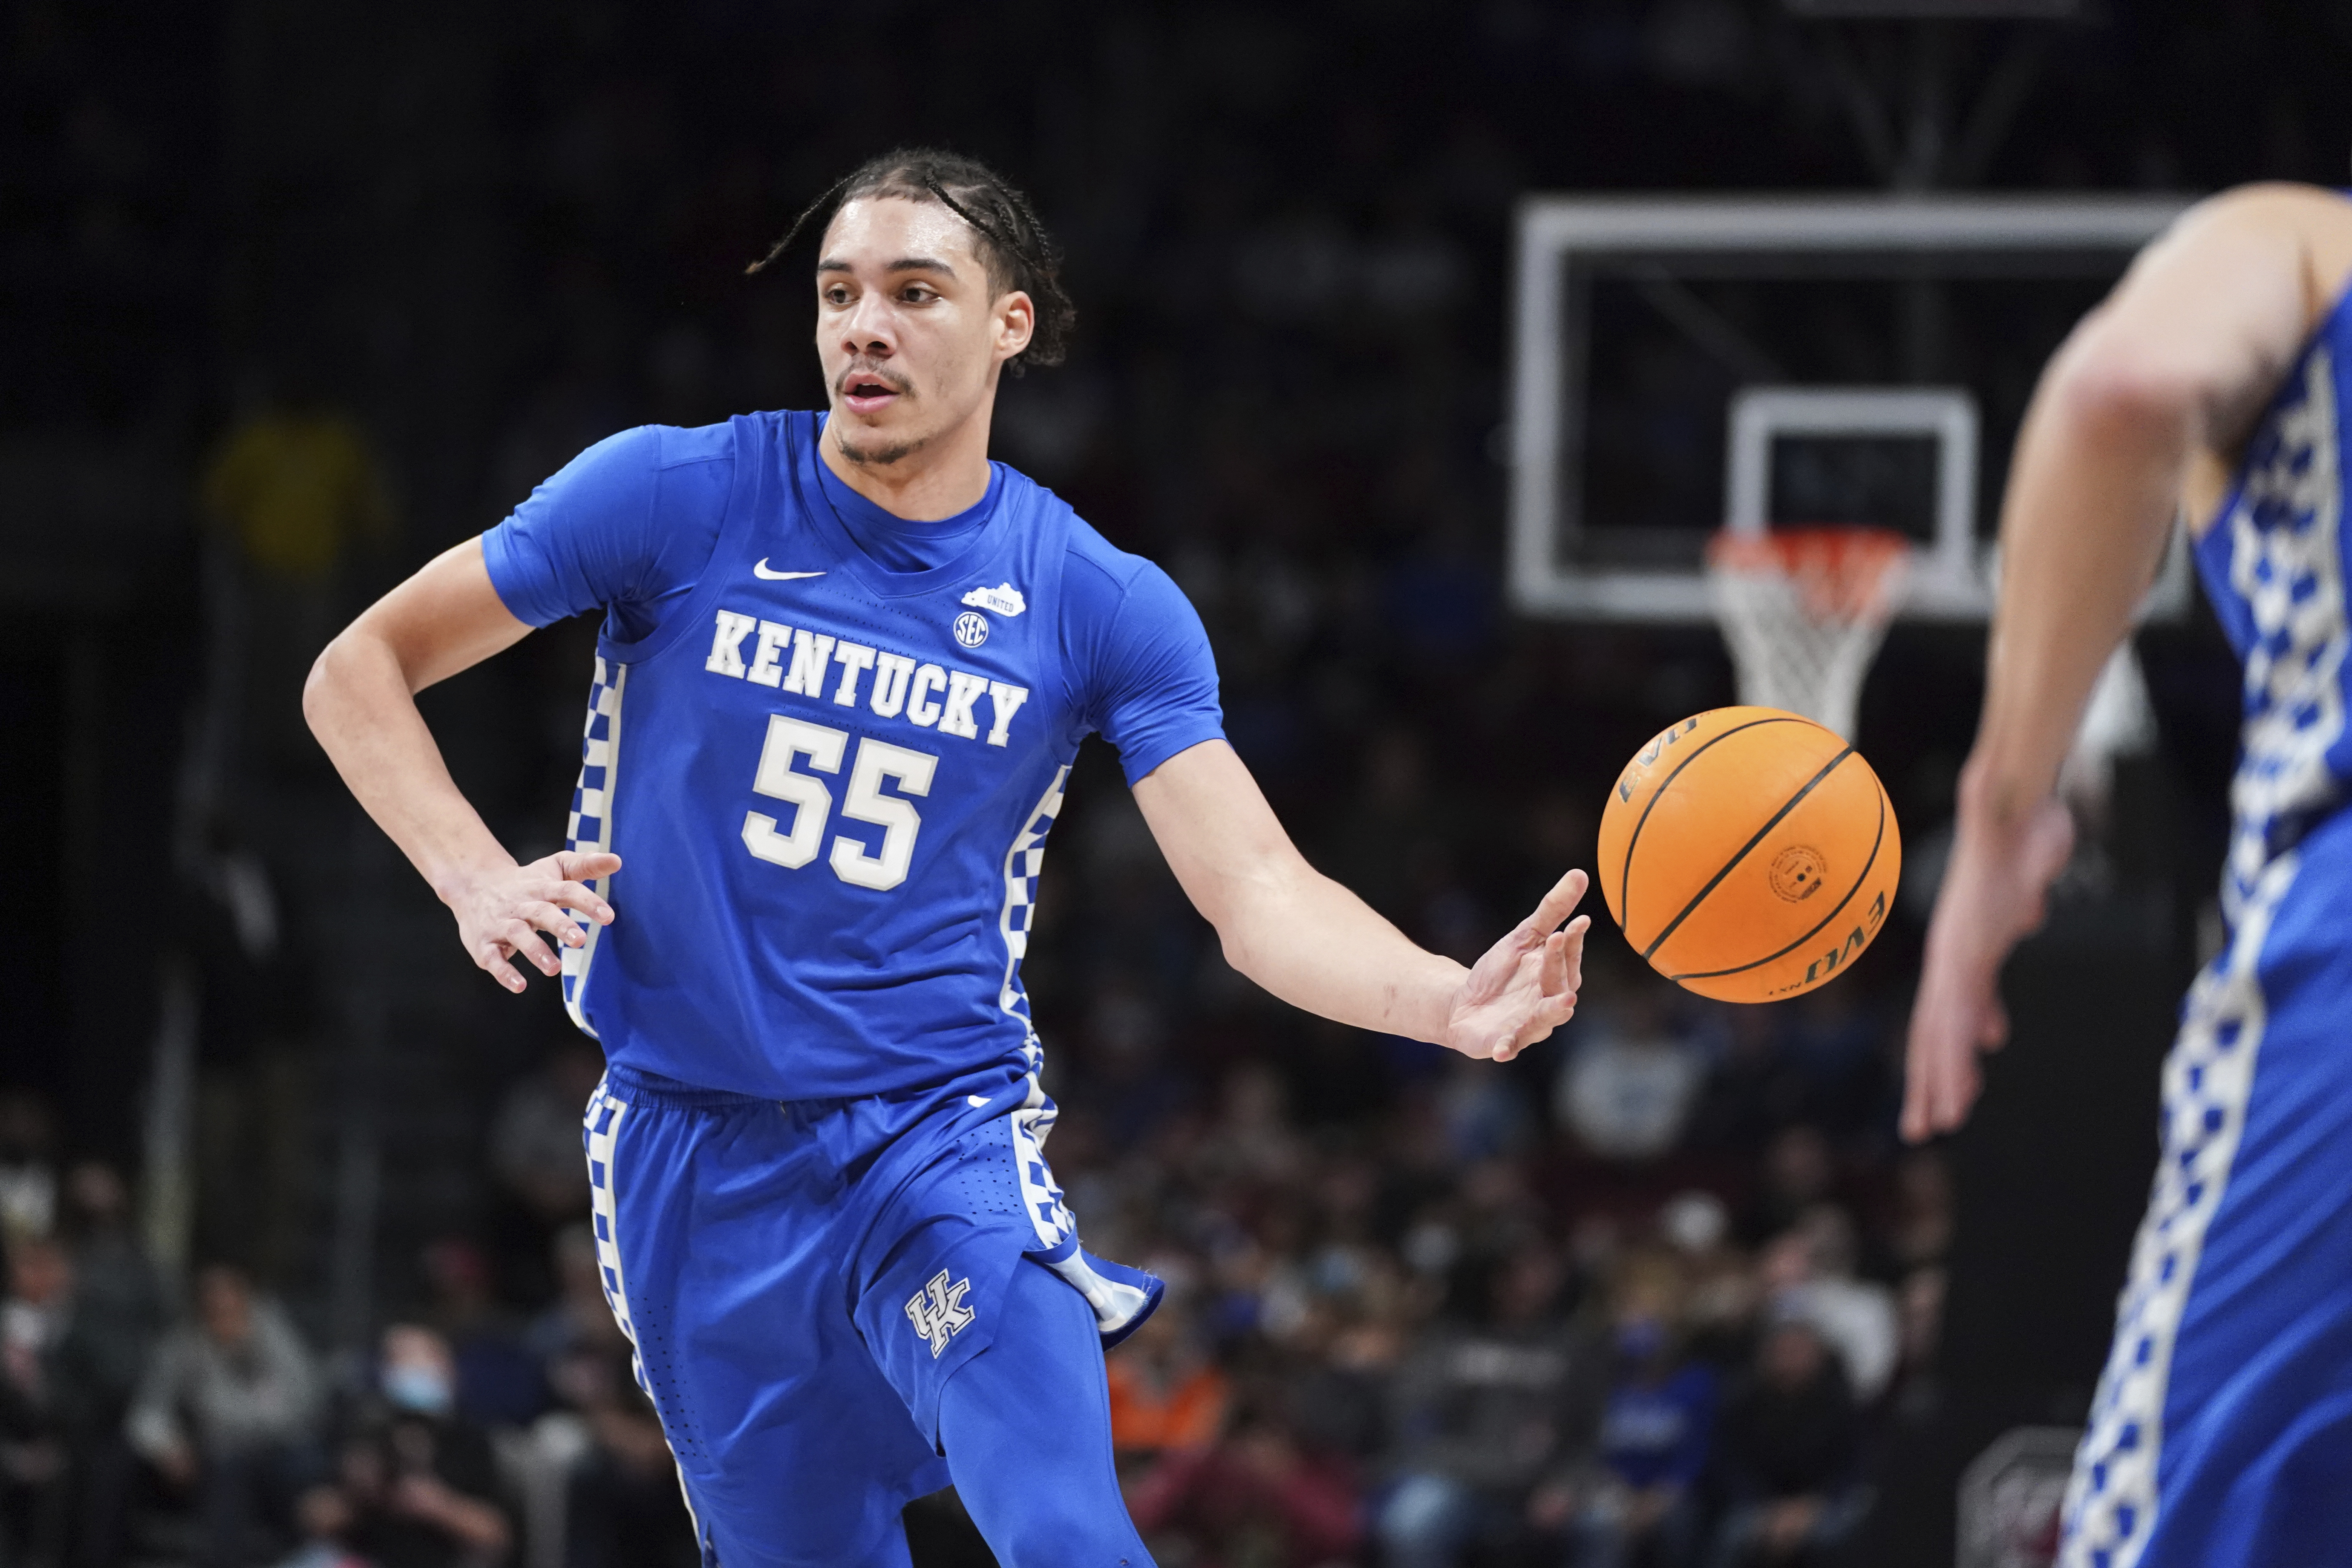 Kentucky Wildcats vs Saint Peters Peacocks basketball FREE LIVE STREAM, score, odds, TV channel, how to watch online (3/17/22)